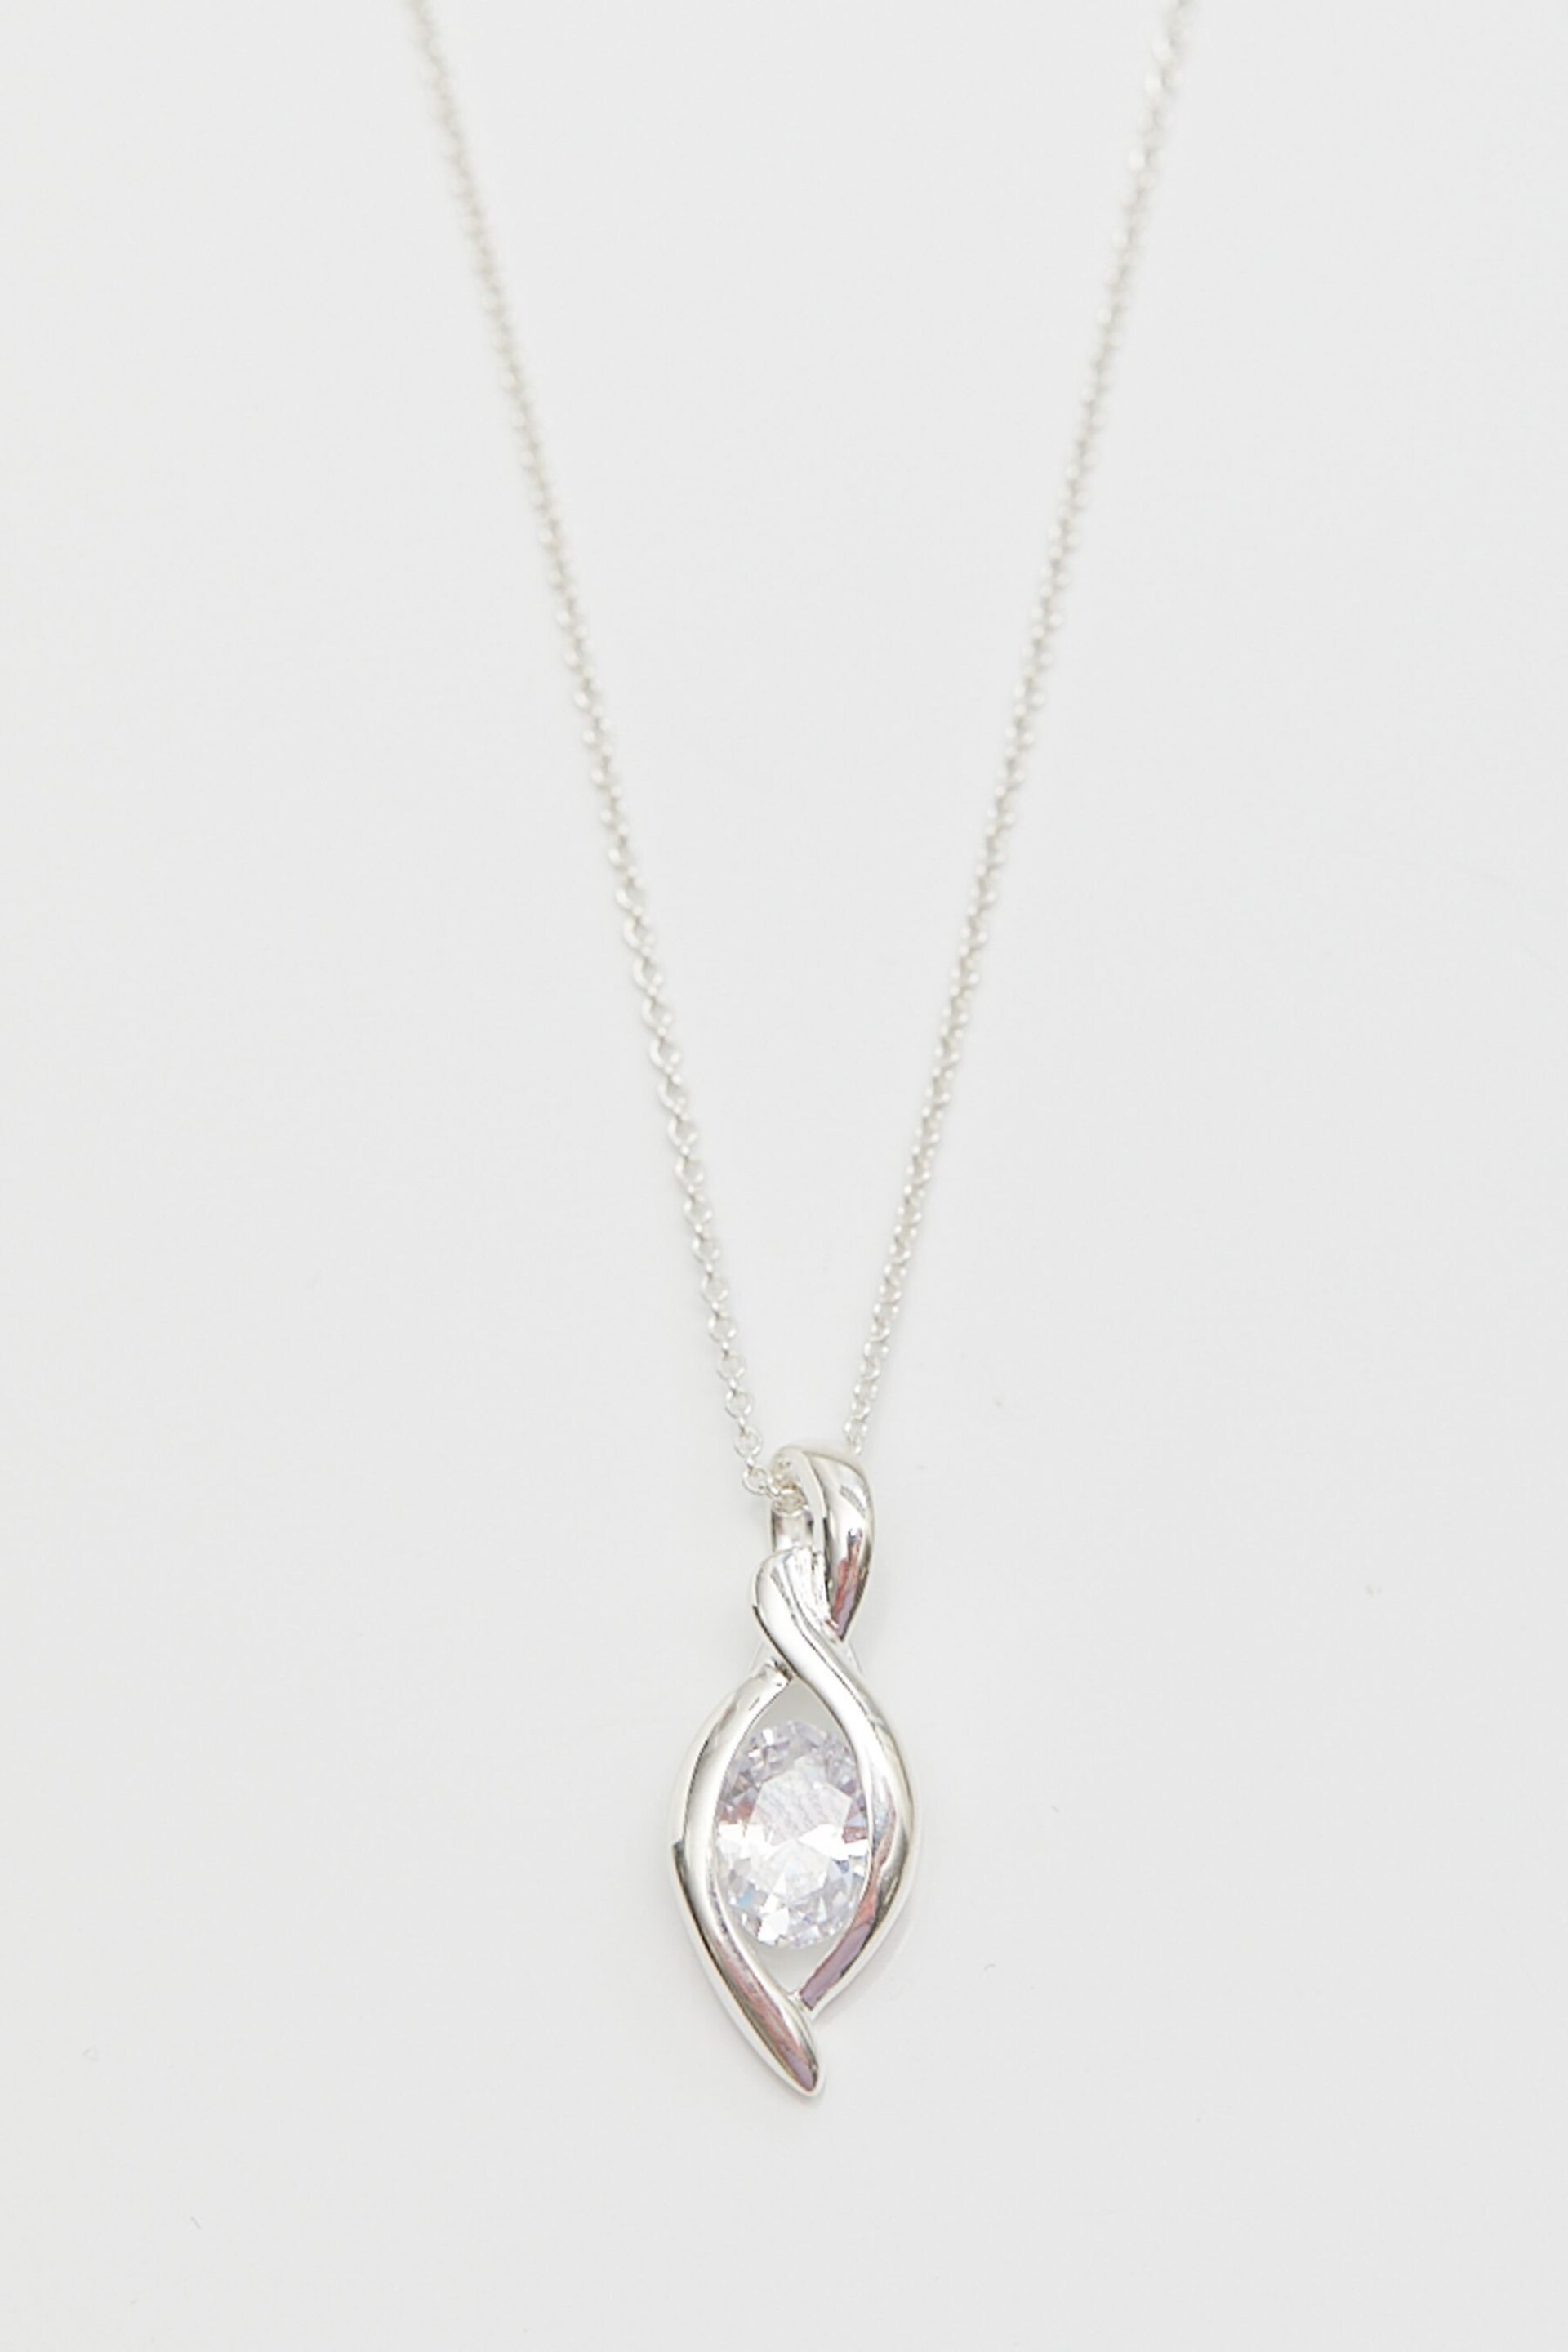 Simply Silver Silver Tone Cubic Zirconia Navette Pendant Necklace - Image 2 of 3